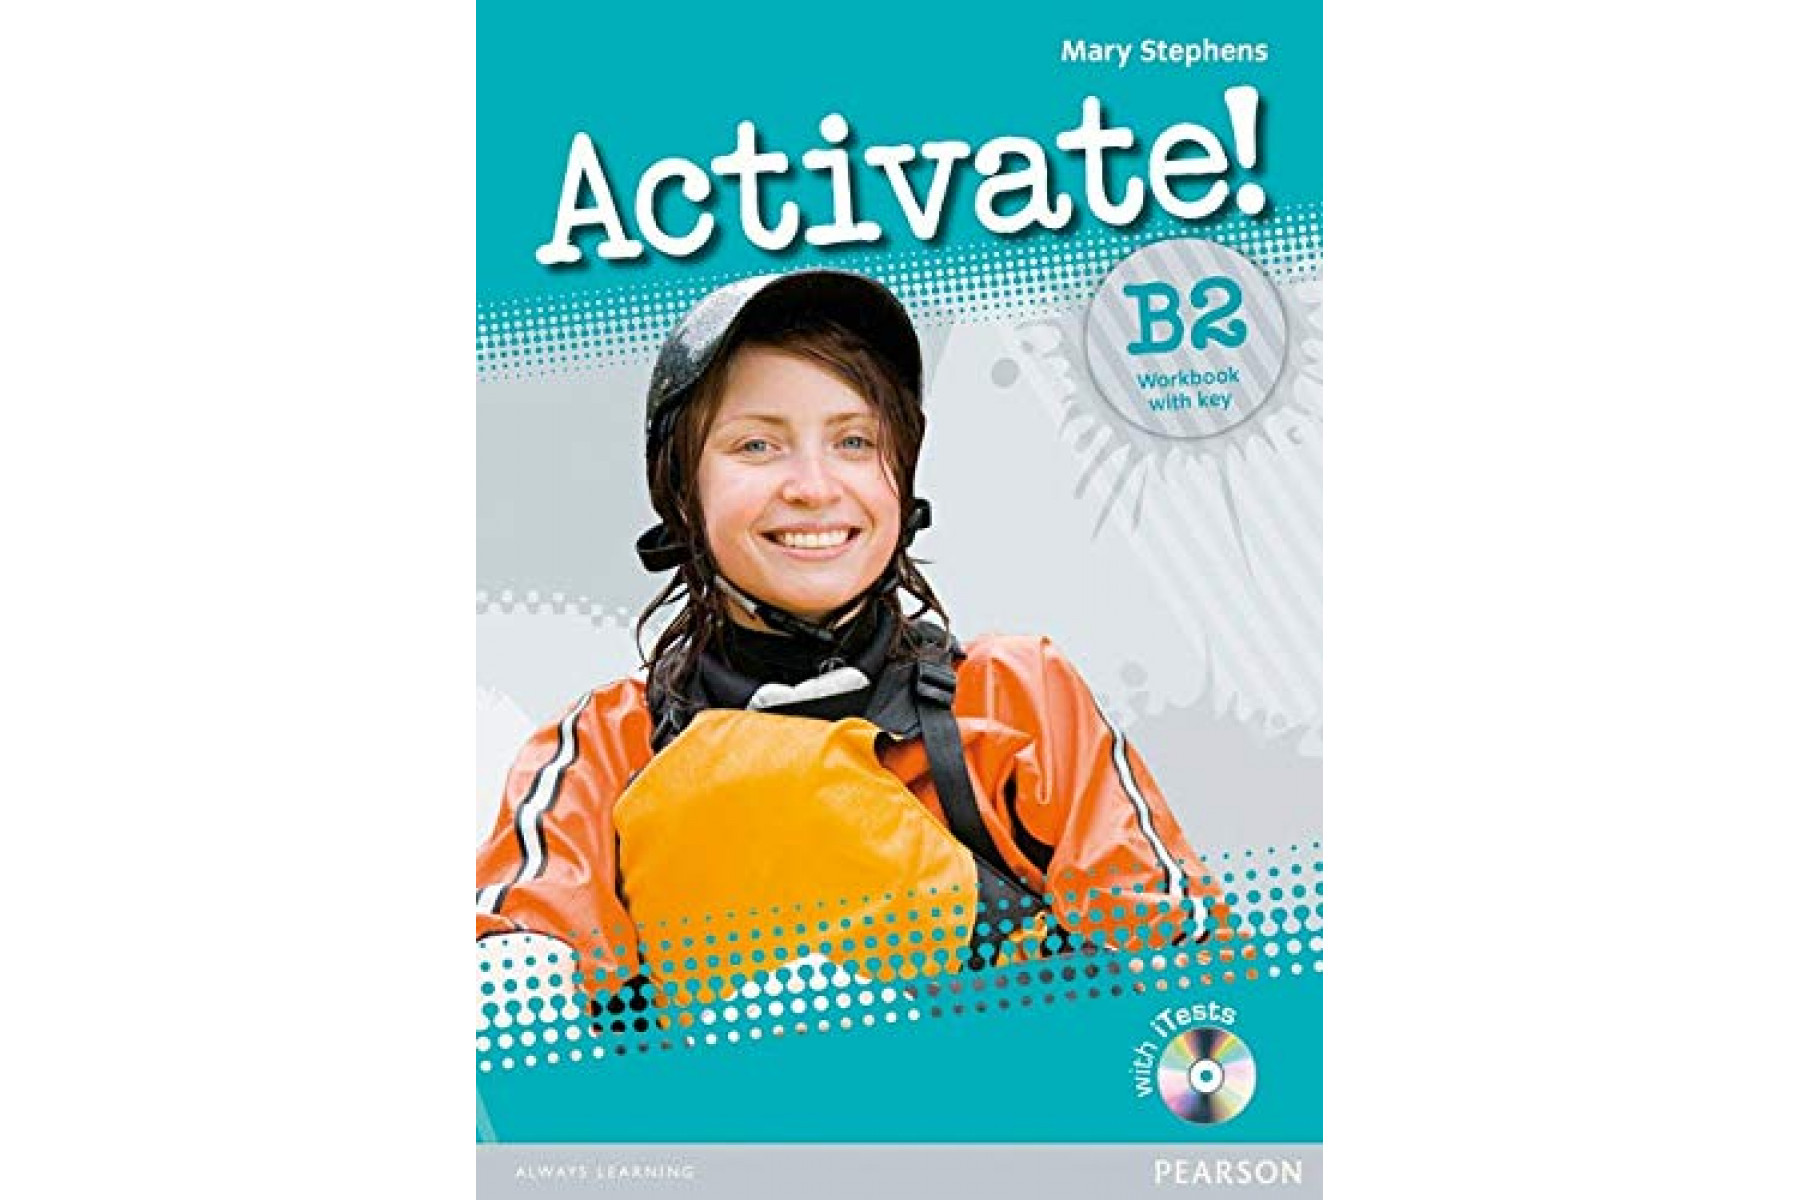 Activate! B2: Workbook with Key/CD-ROM Pack